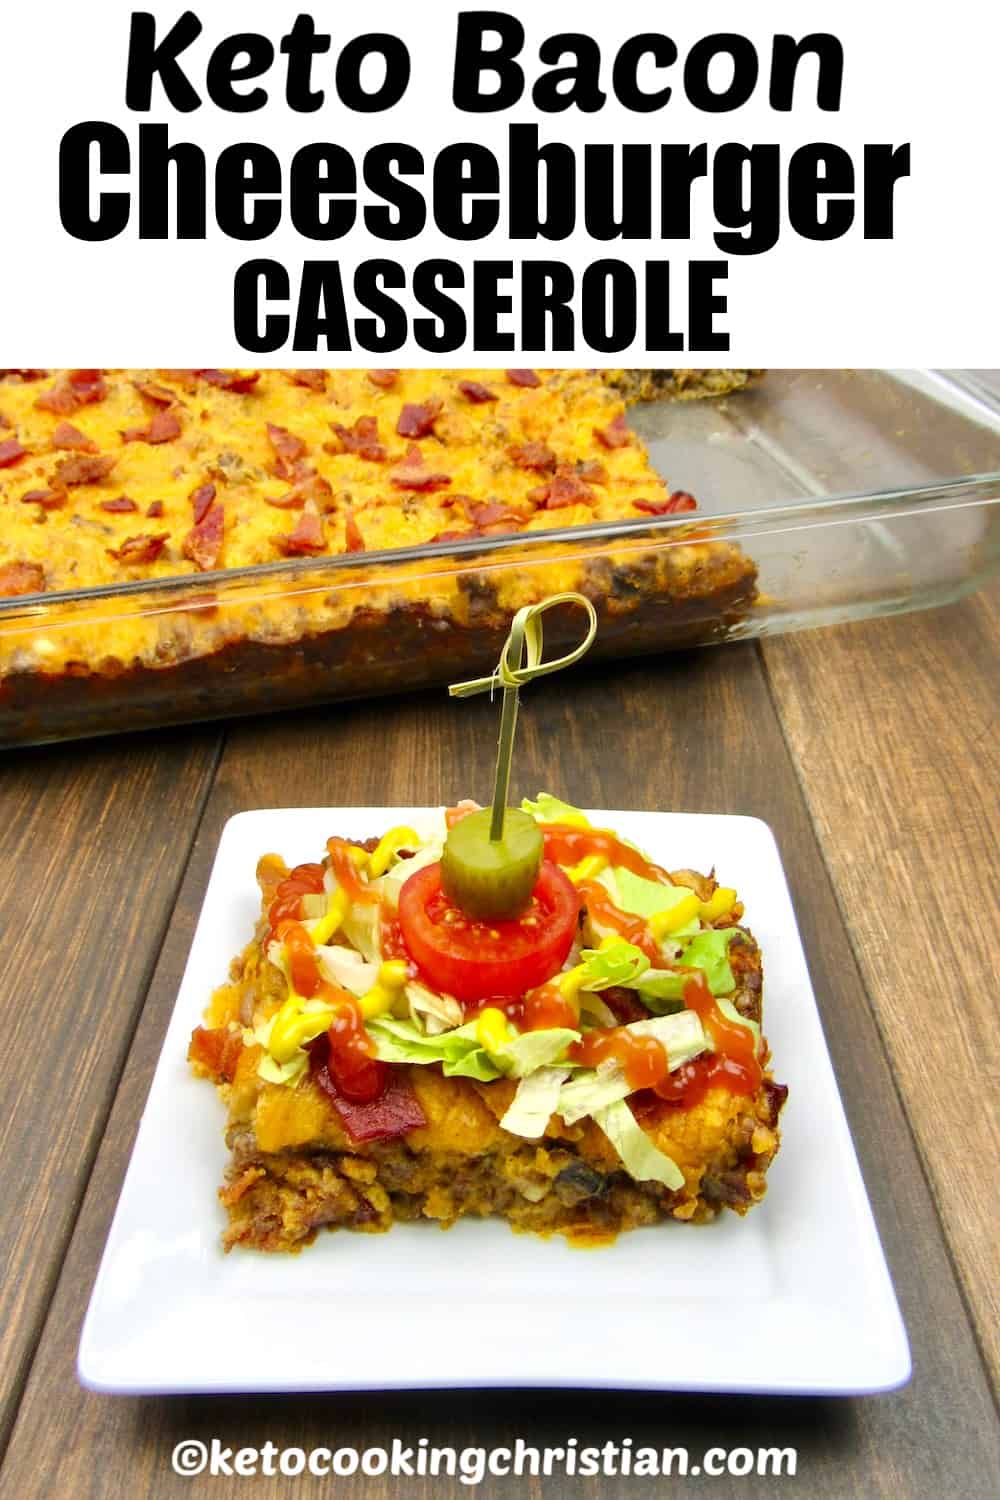 sliced of cheeseburger casserole on white plate with casserole in background